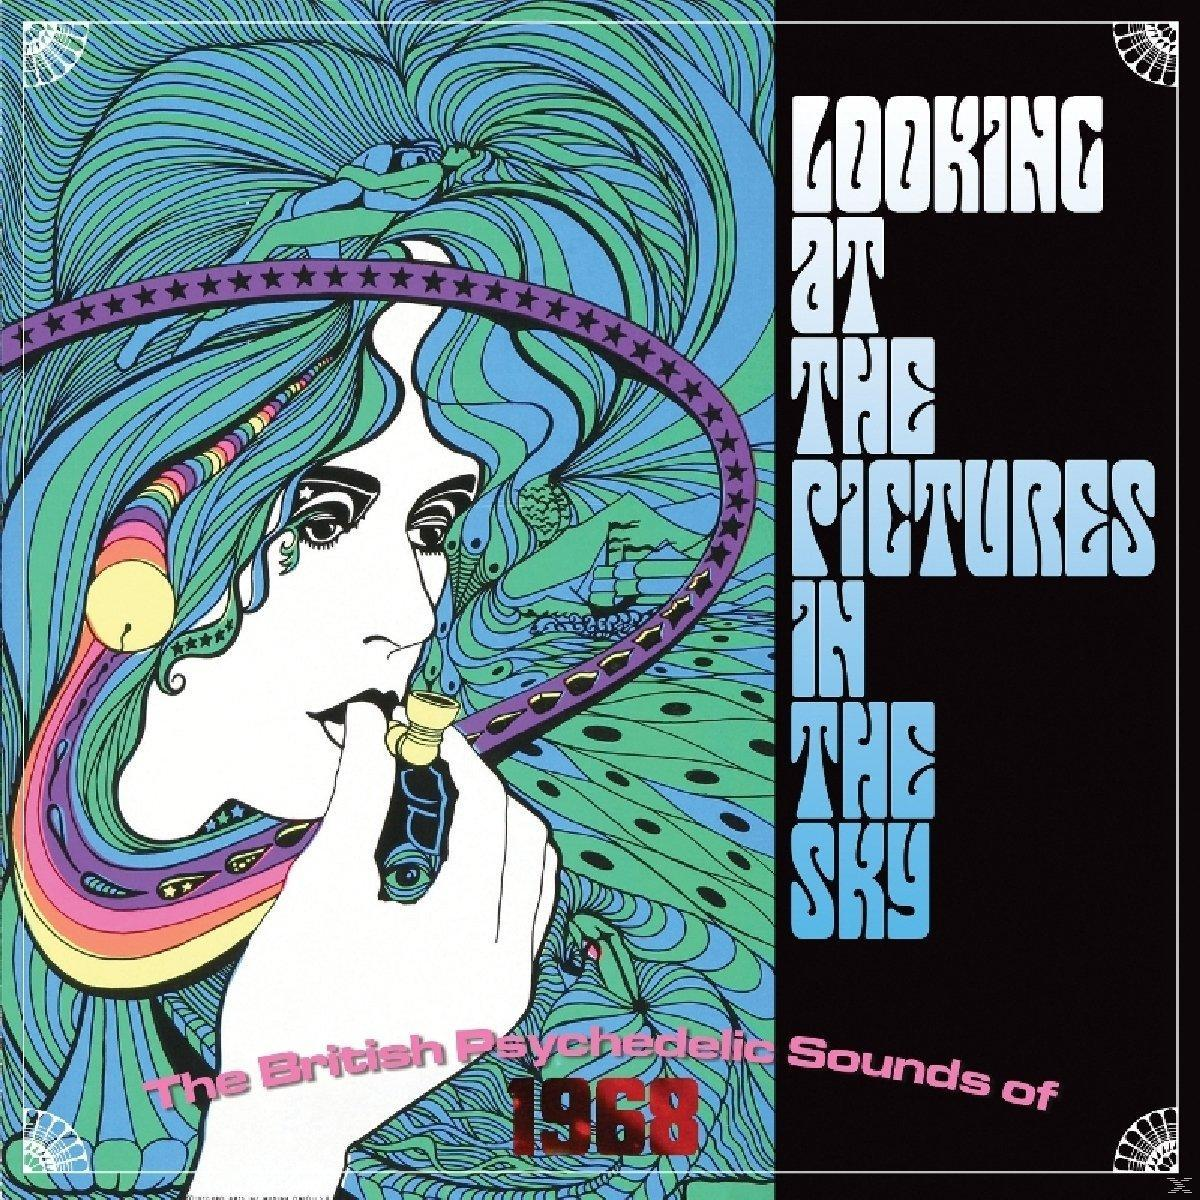 VARIOUS - Looking At The Psych The - (CD) Sky-British In Pictures